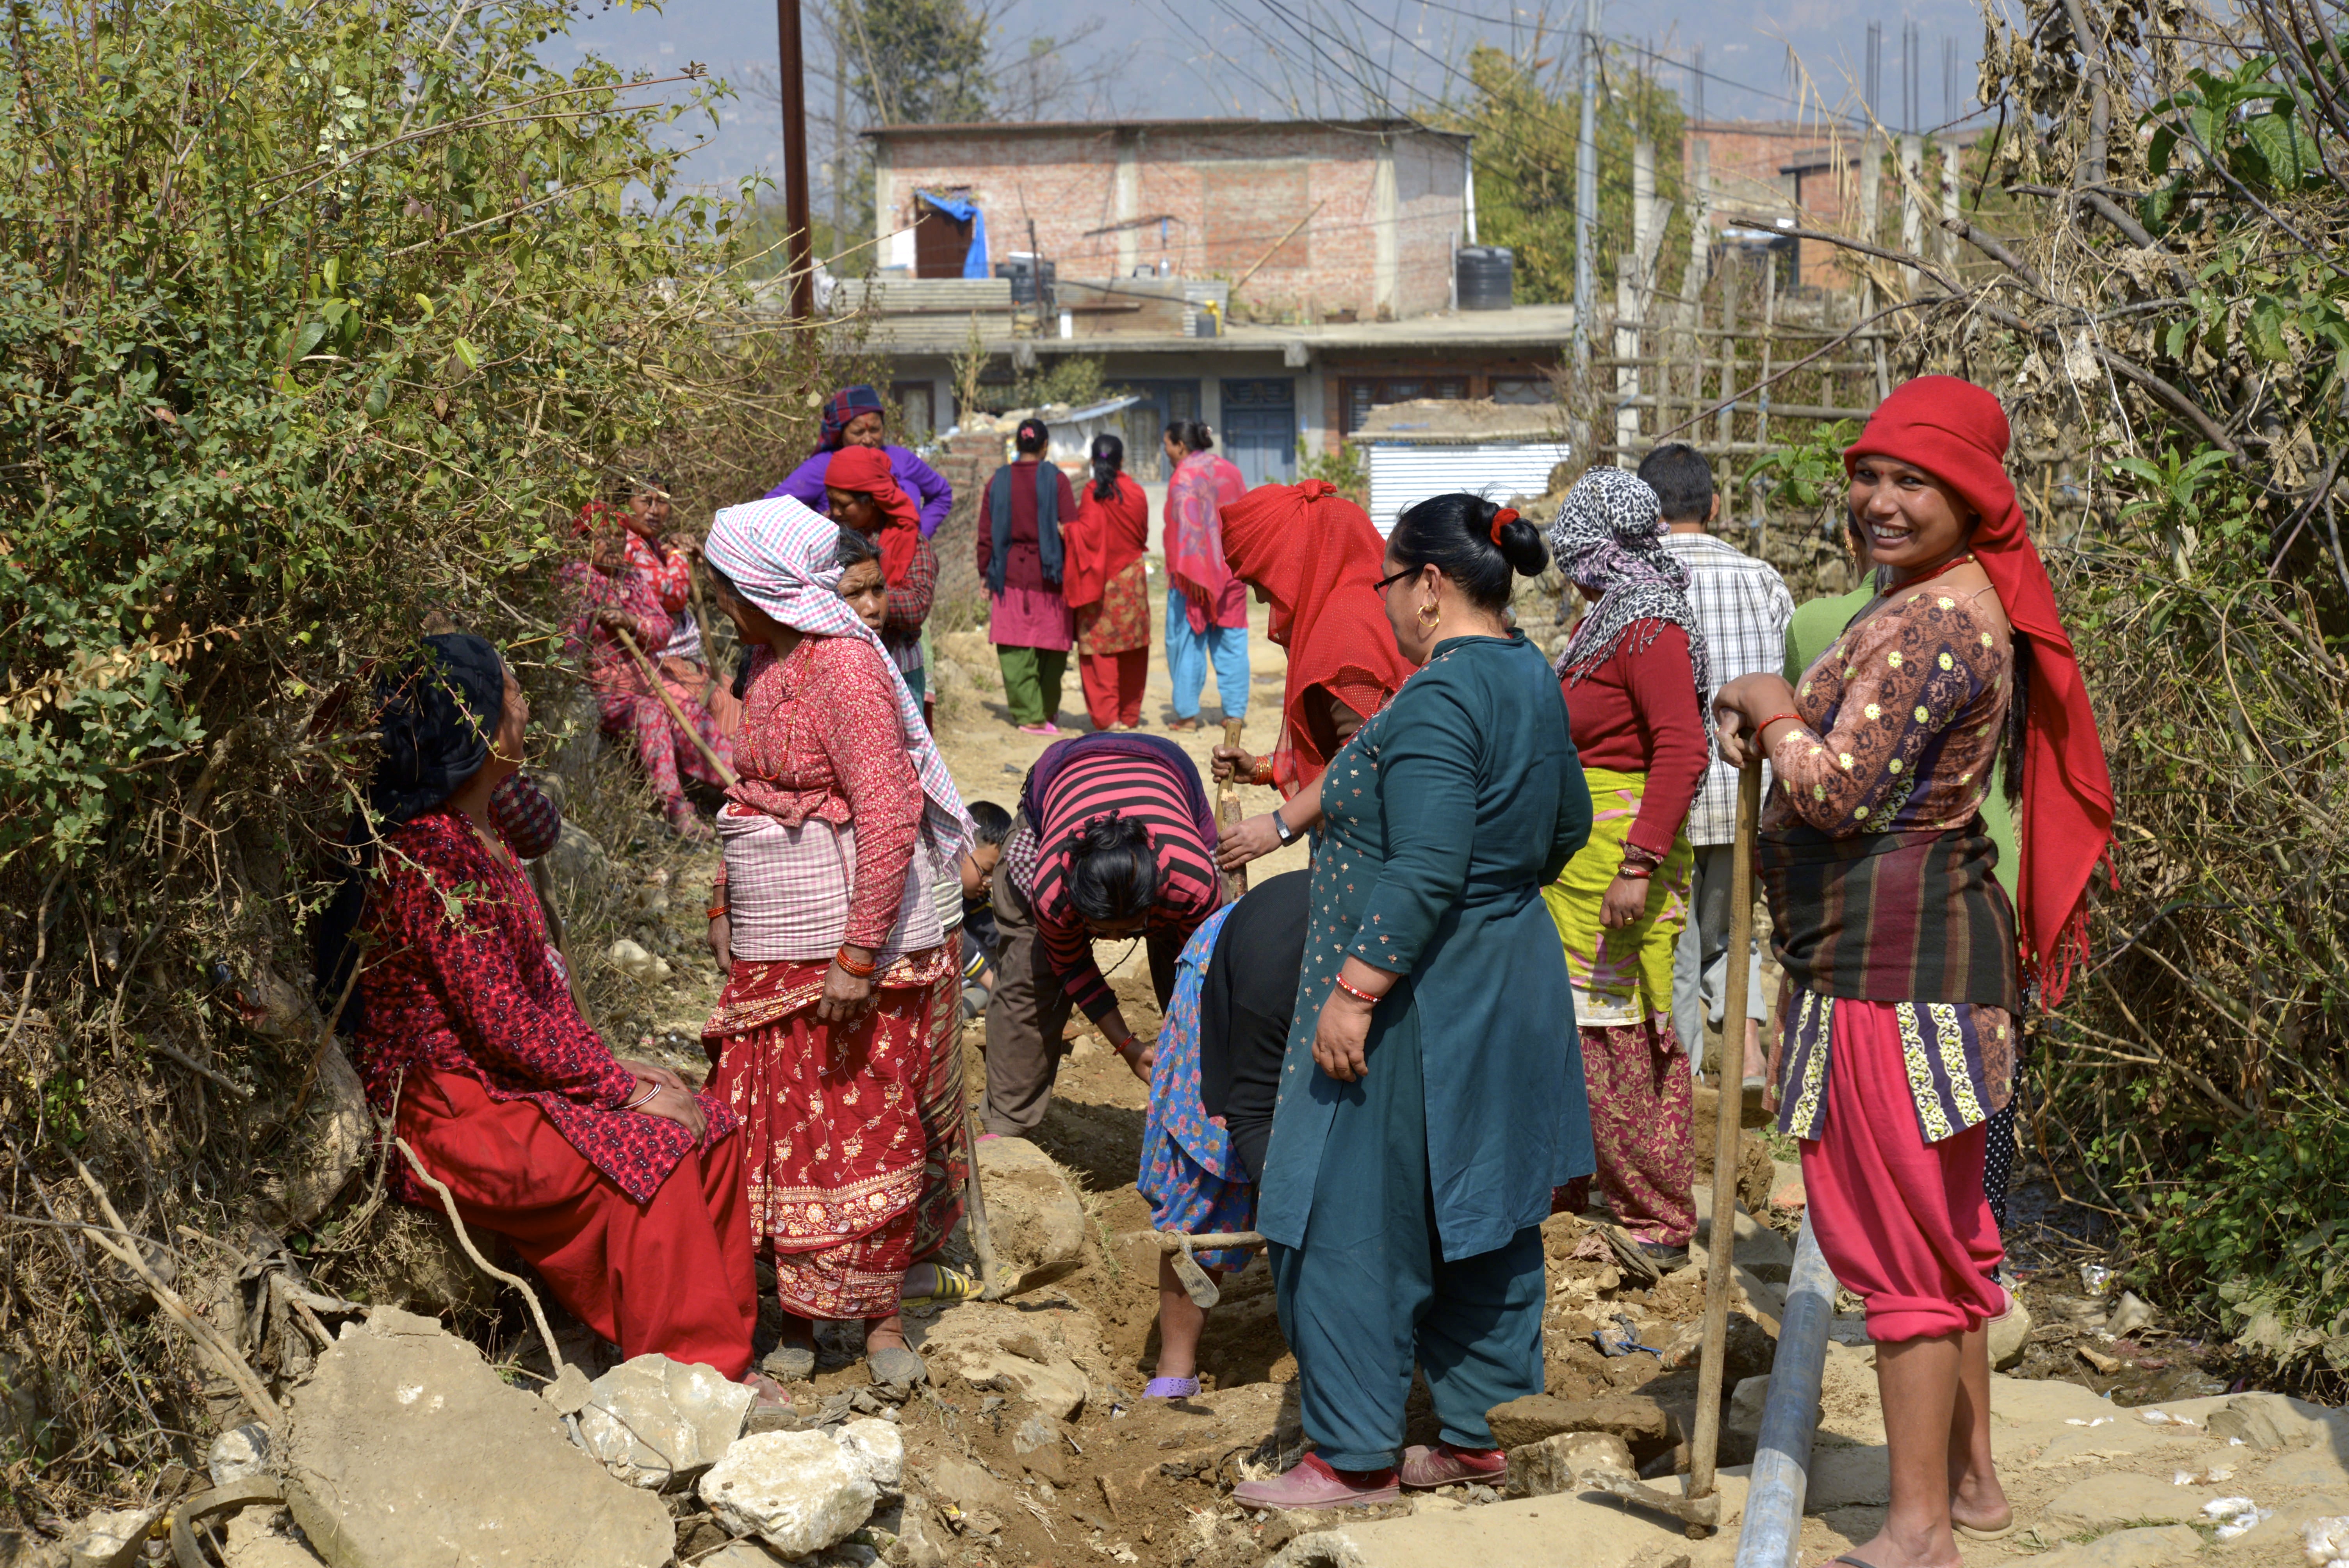 Women building irrigation system in the village of Matatirtha, in Kathmandu District in the Bagmati Zone of central Nepal